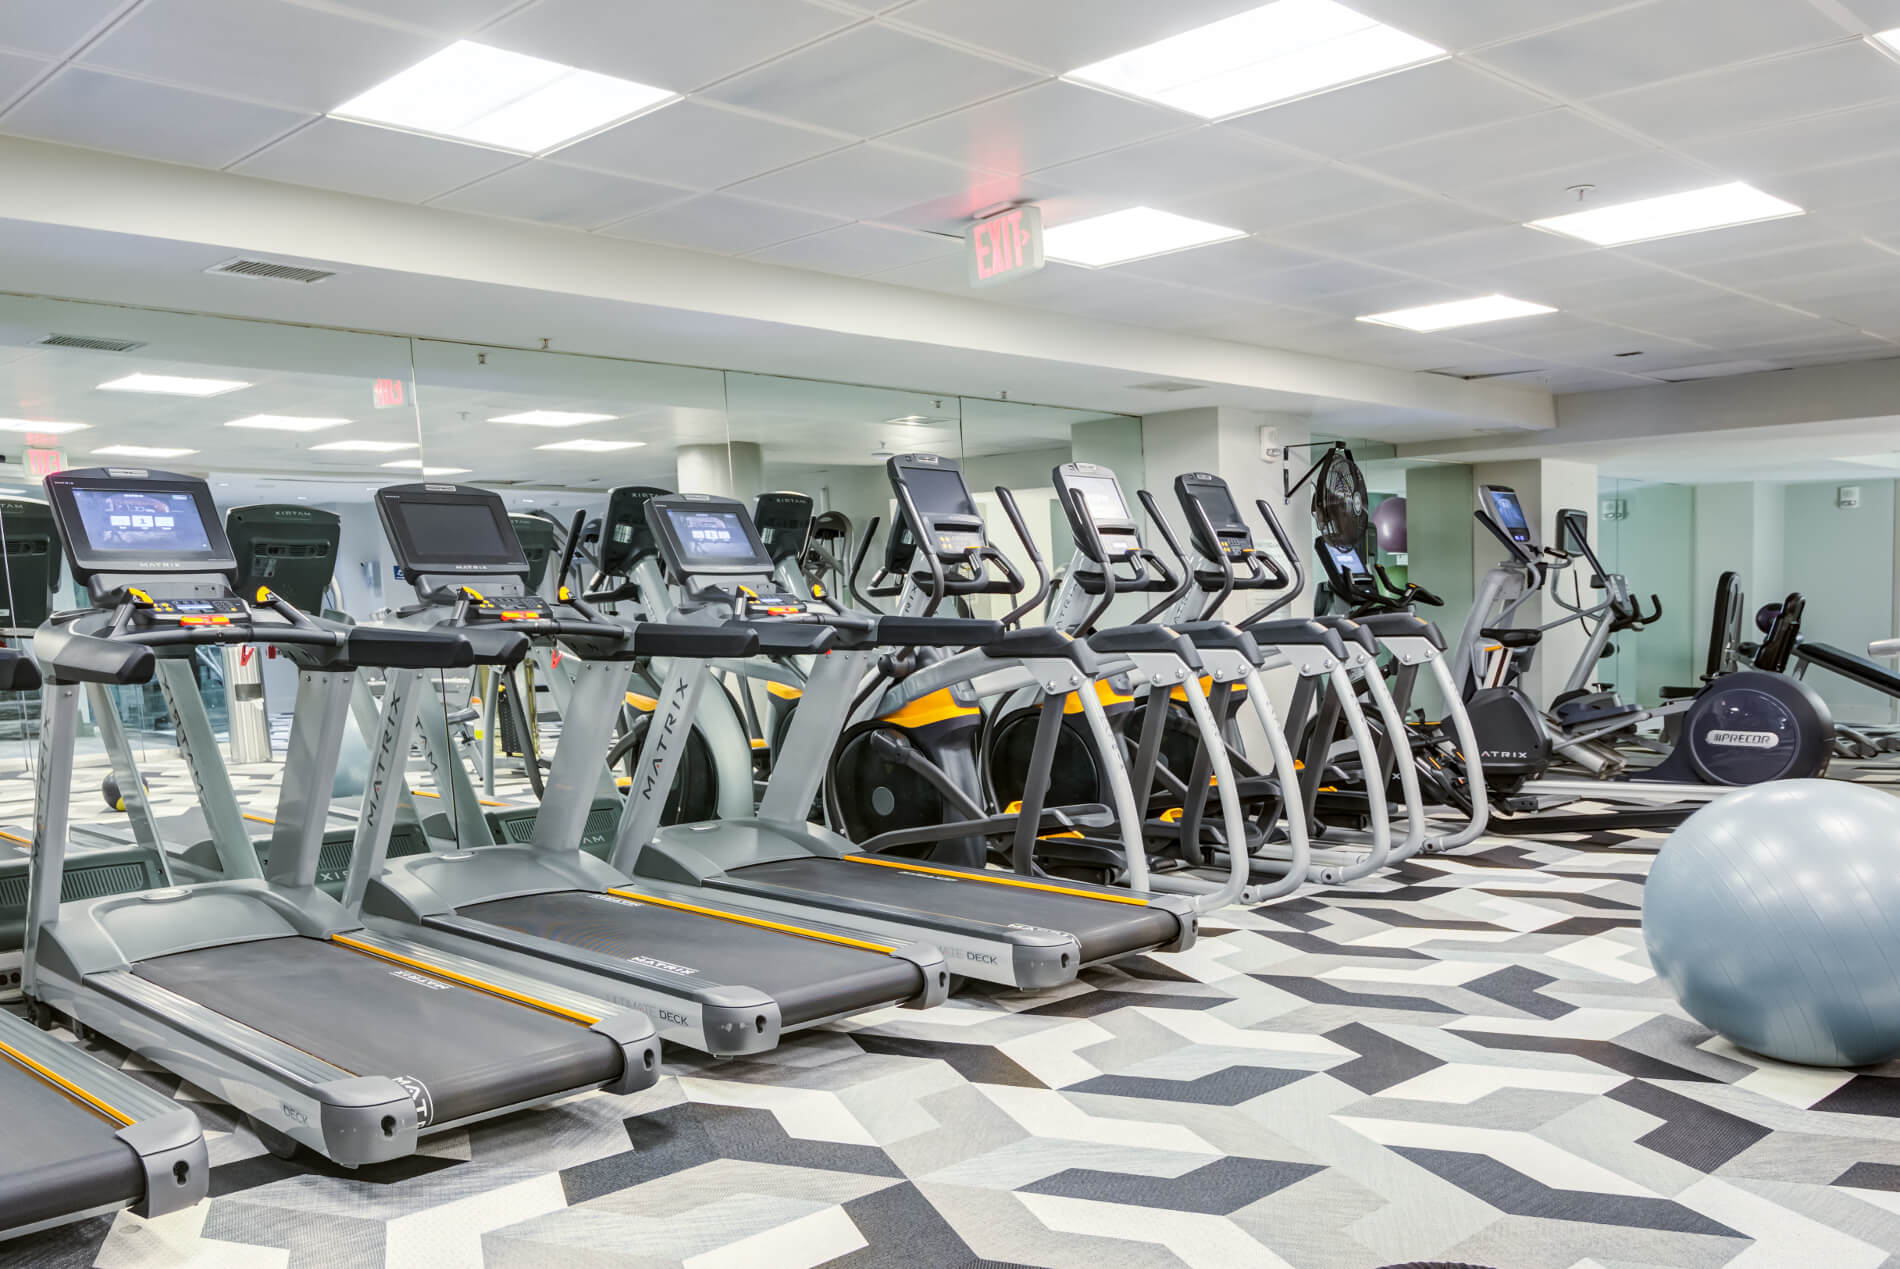 Gym with treadmills, elliptical trainers and bikes